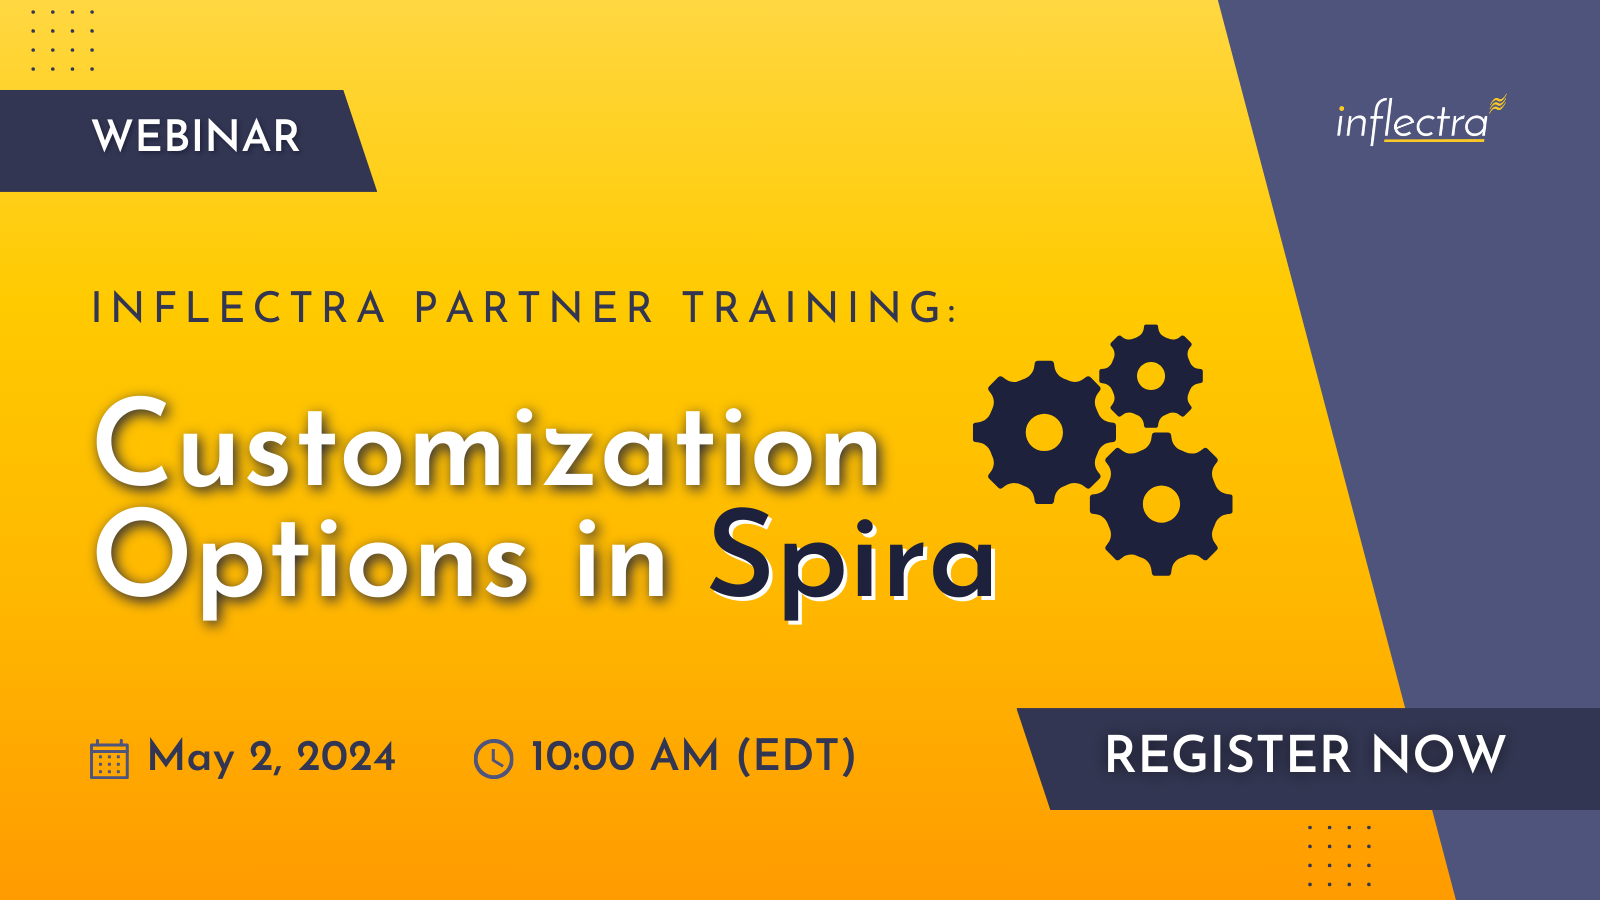 A webinar advertisement for Inflectra Partner Training on Customization Options in Spira. The webinar will be held on May 2, 2024 at 10:00 AM EDT.